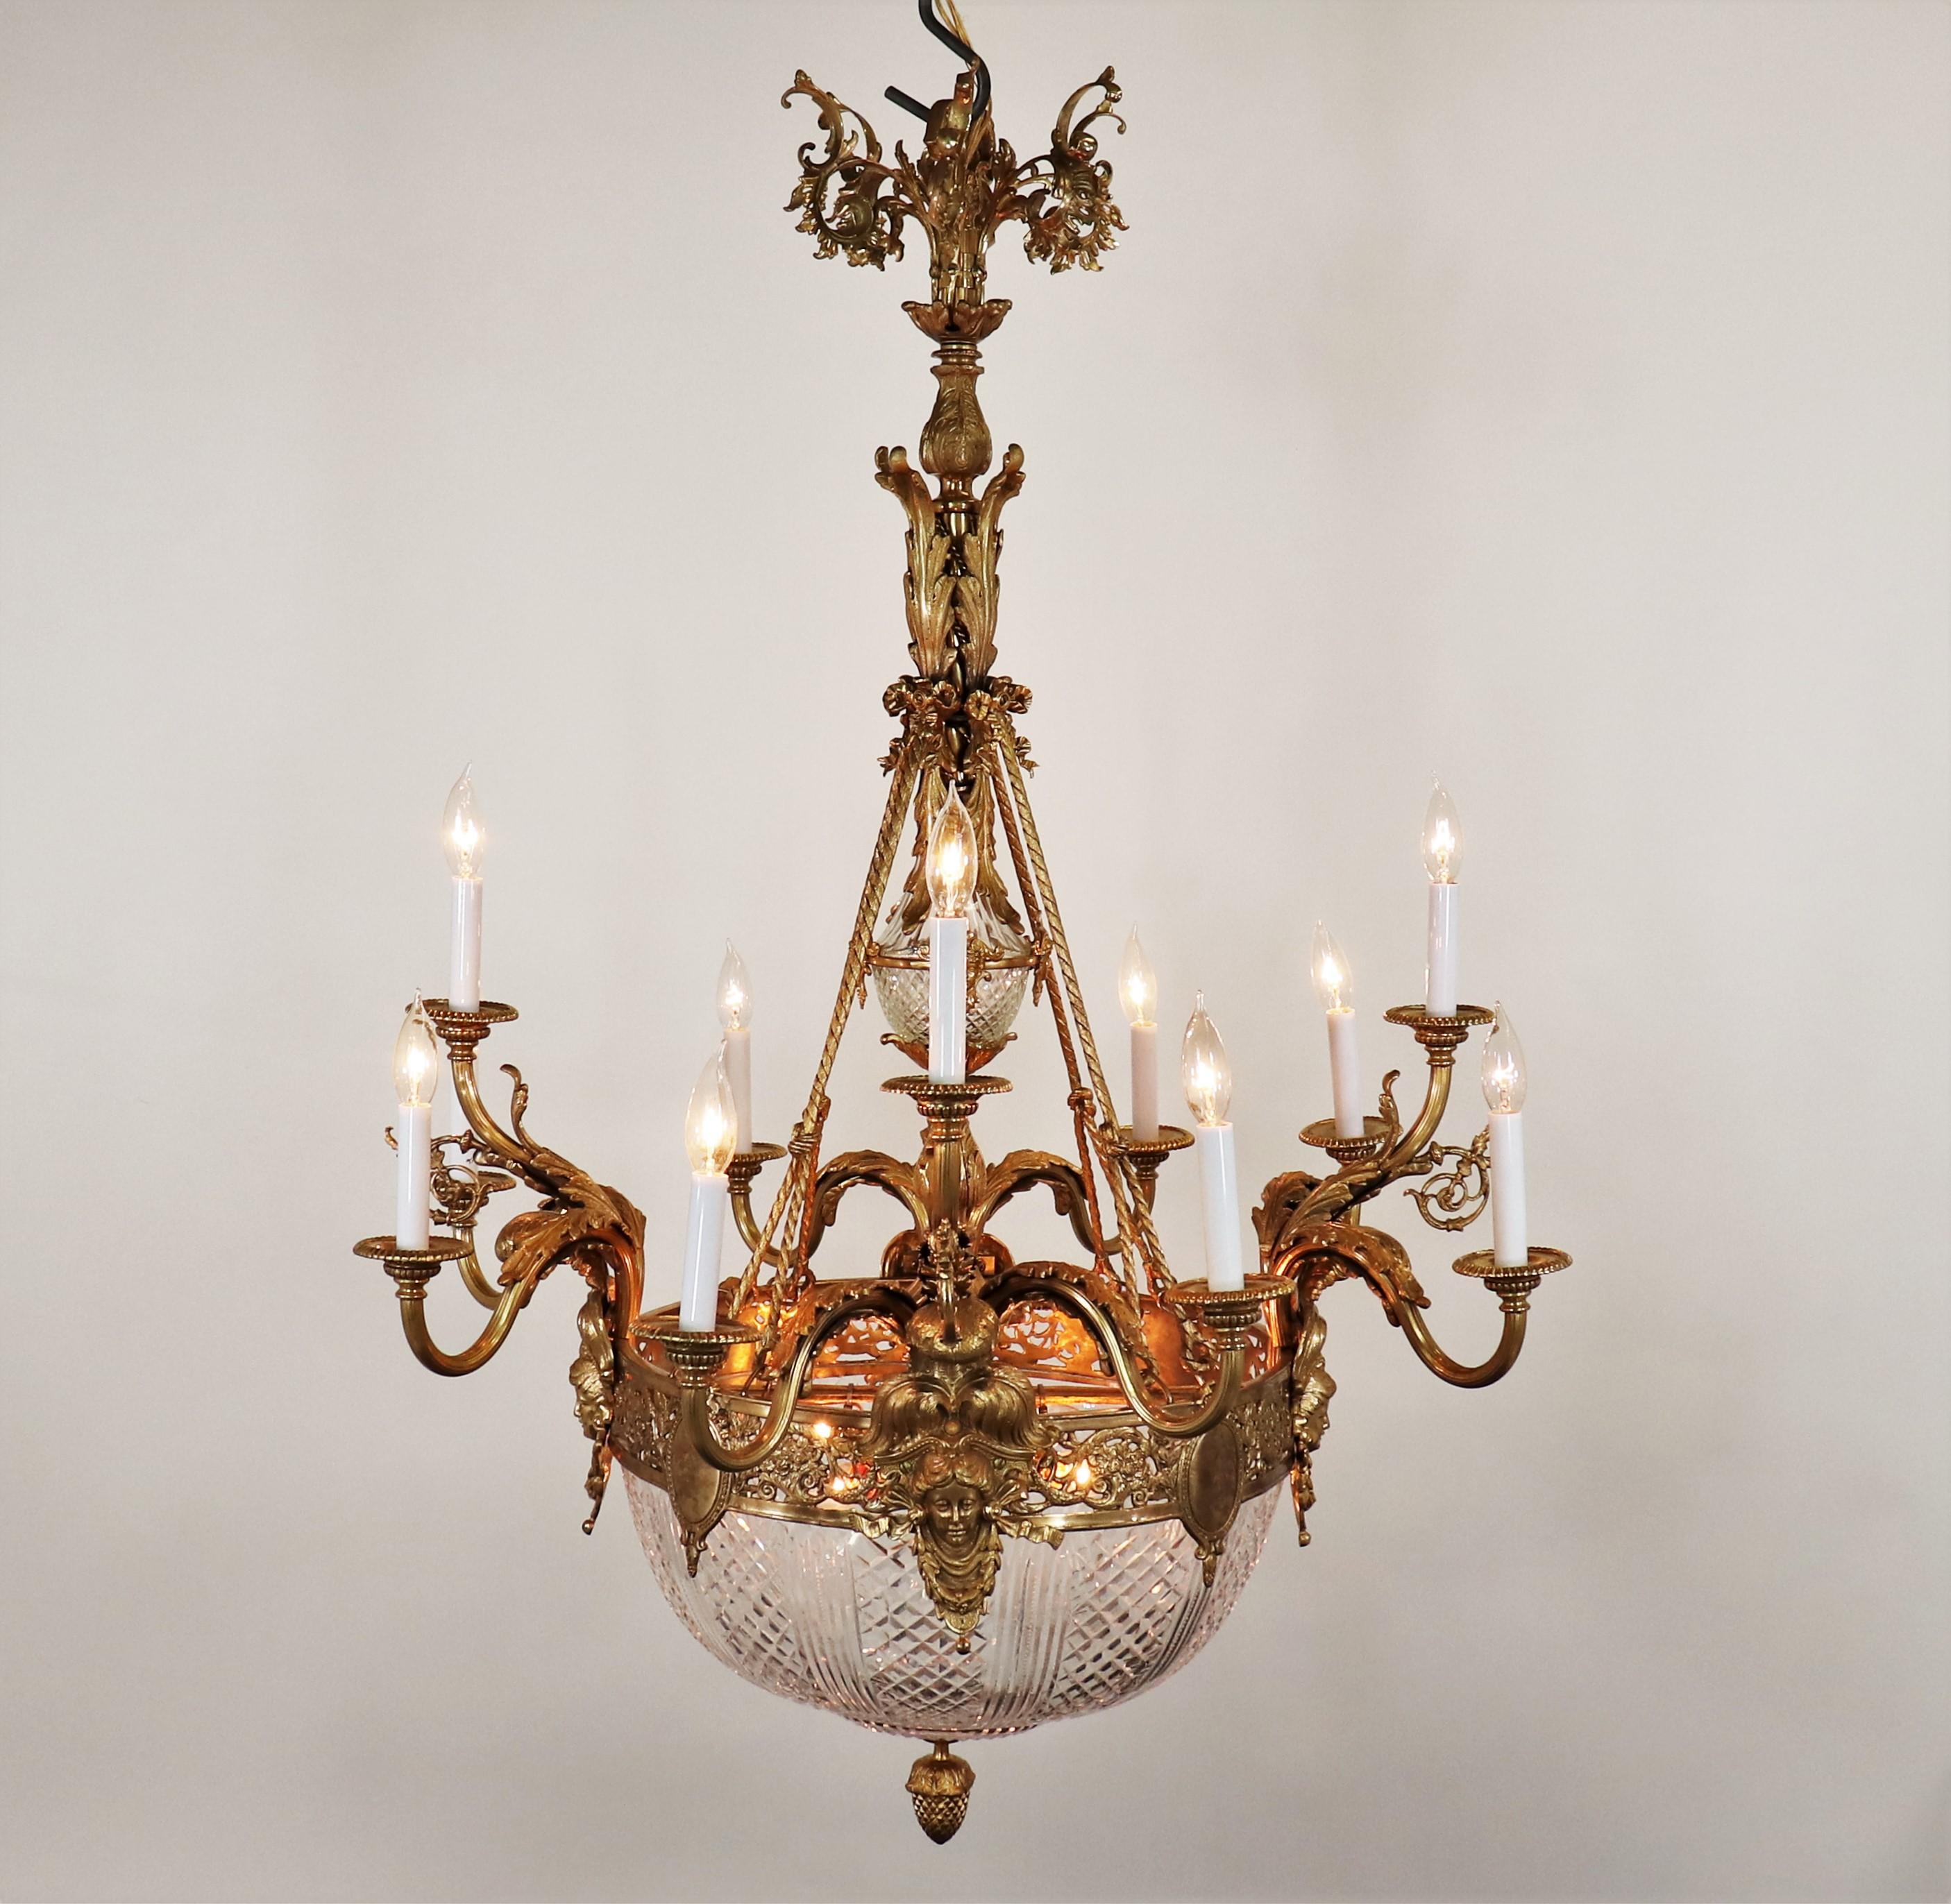 Large Circa 1910 French Beaux-Arts gilt bronze chandelier. Finely cast French bronze chandelier in the fashion of Louis XV. This wonderful chandelier has a large cut crystal center bowl. With intricate uniform Rococo and Neoclassical bronze